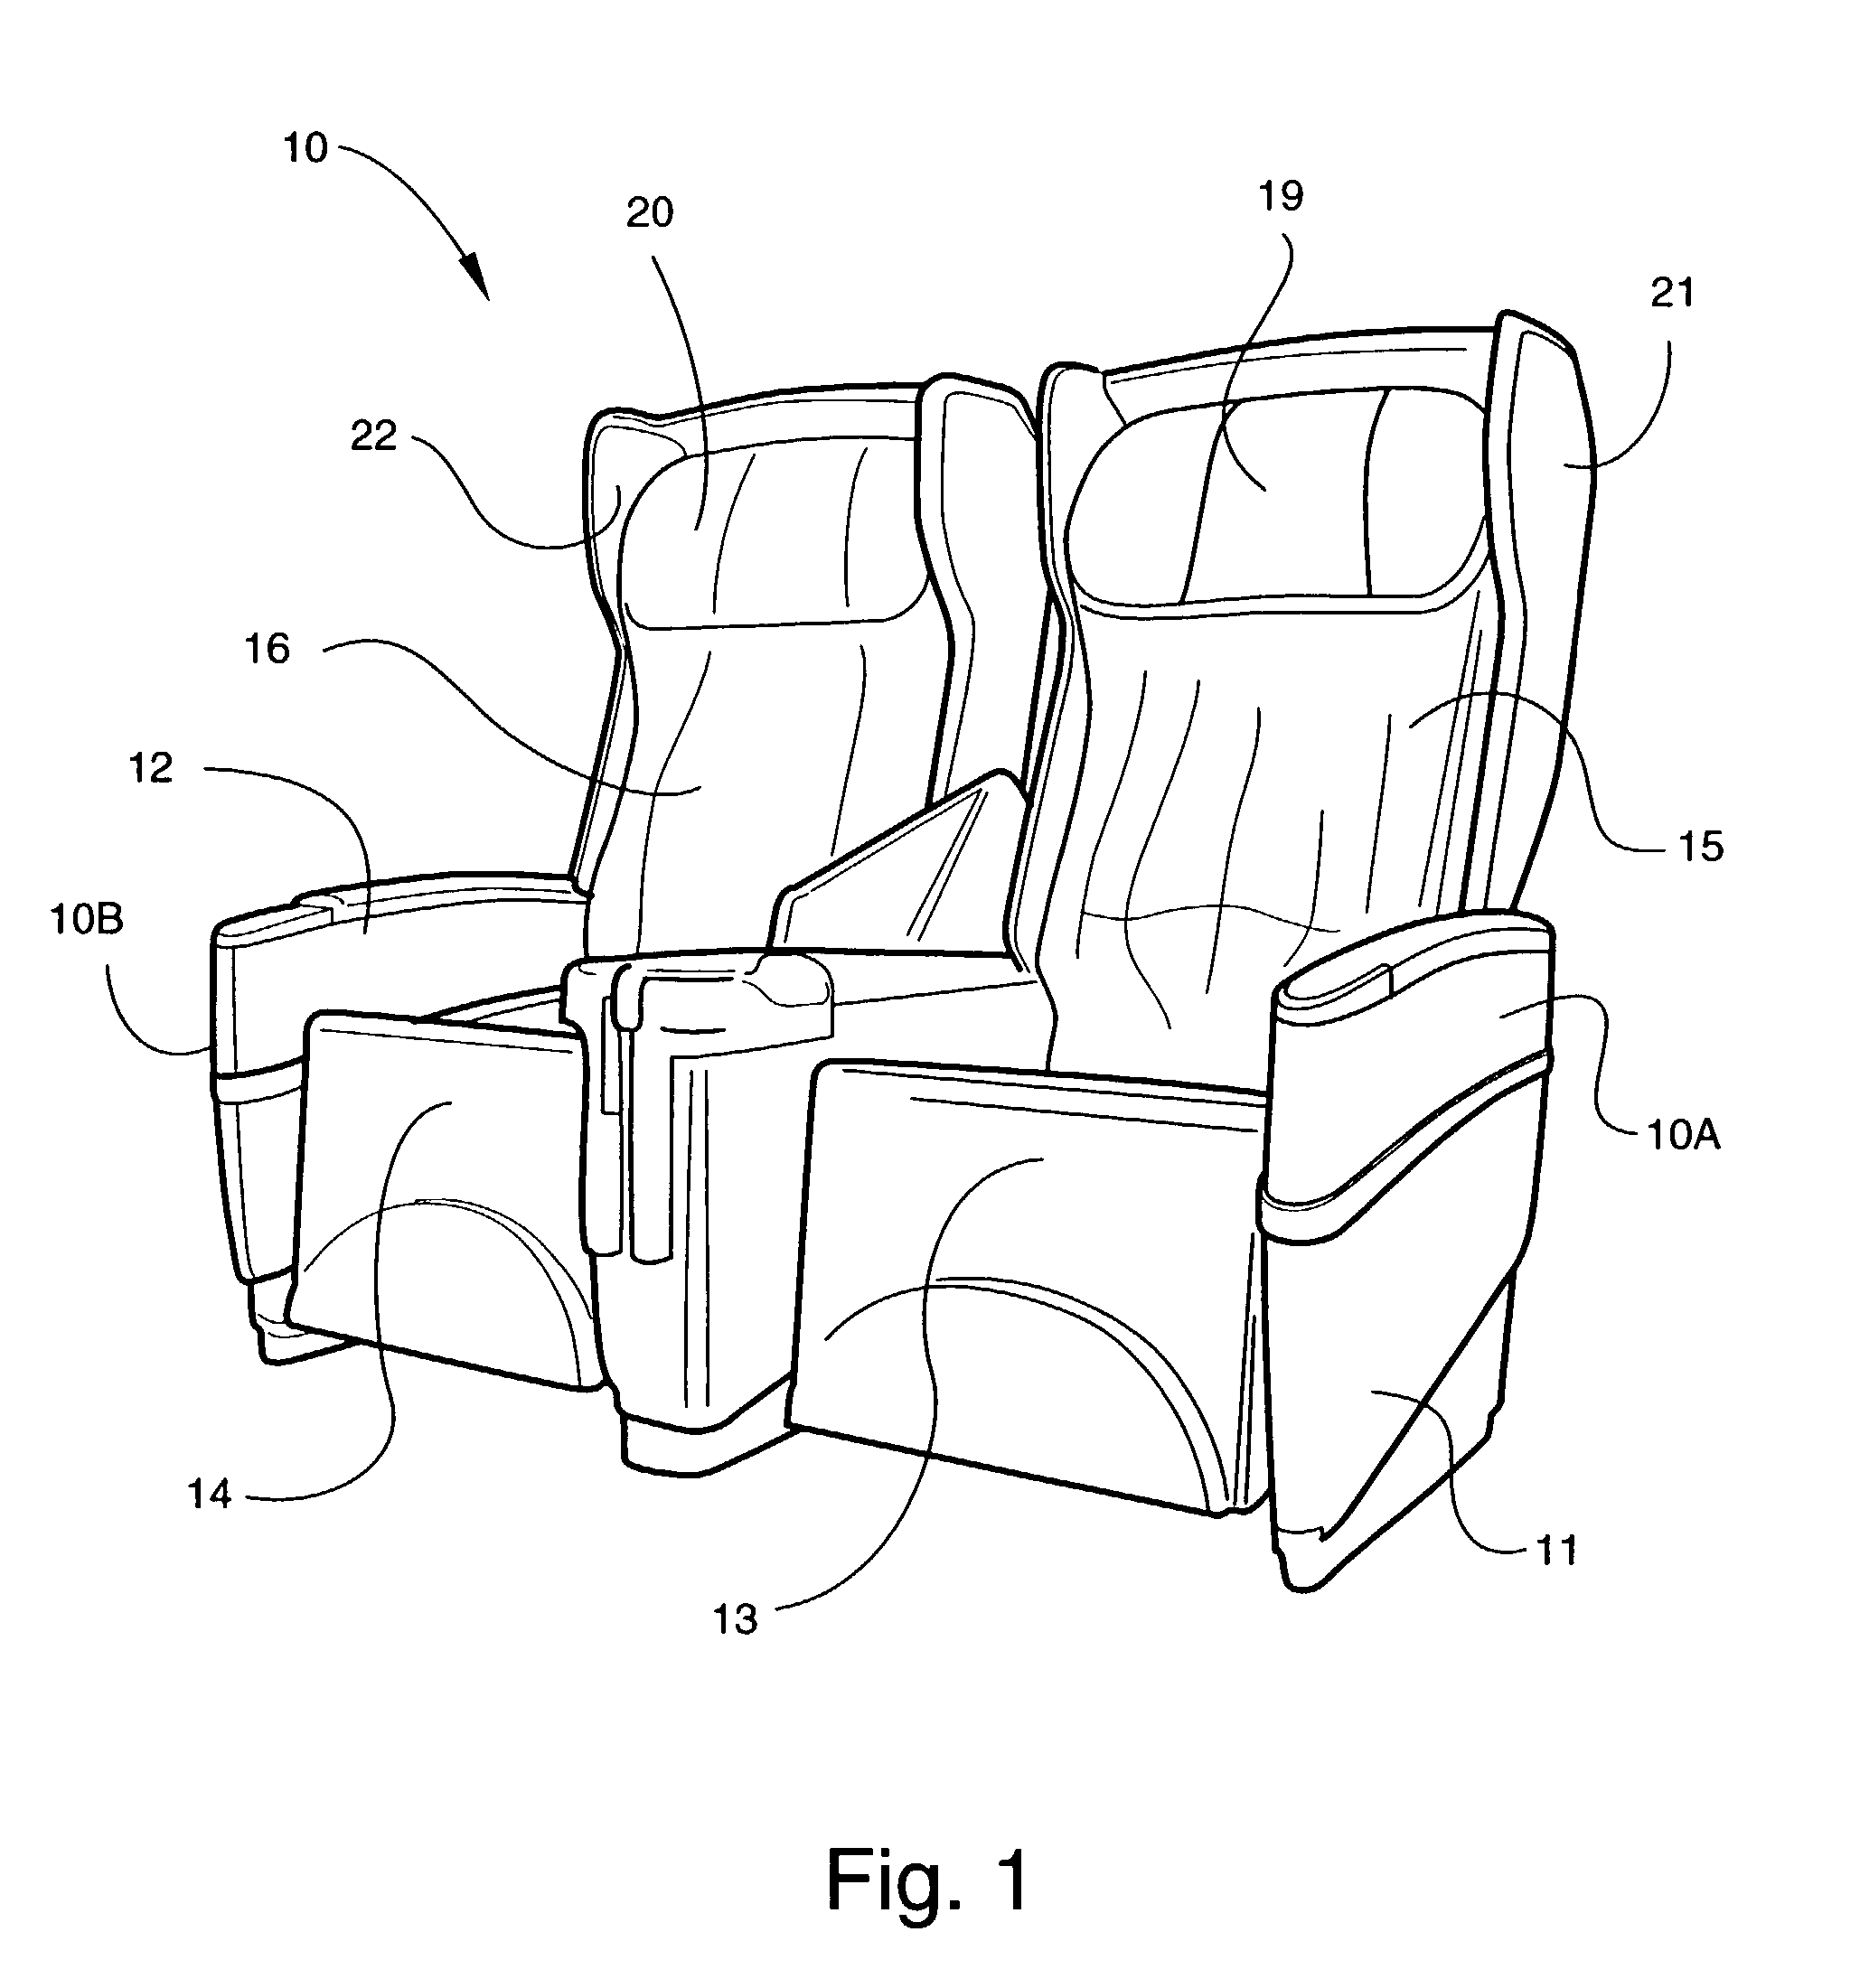 Passenger seat with privacy shell